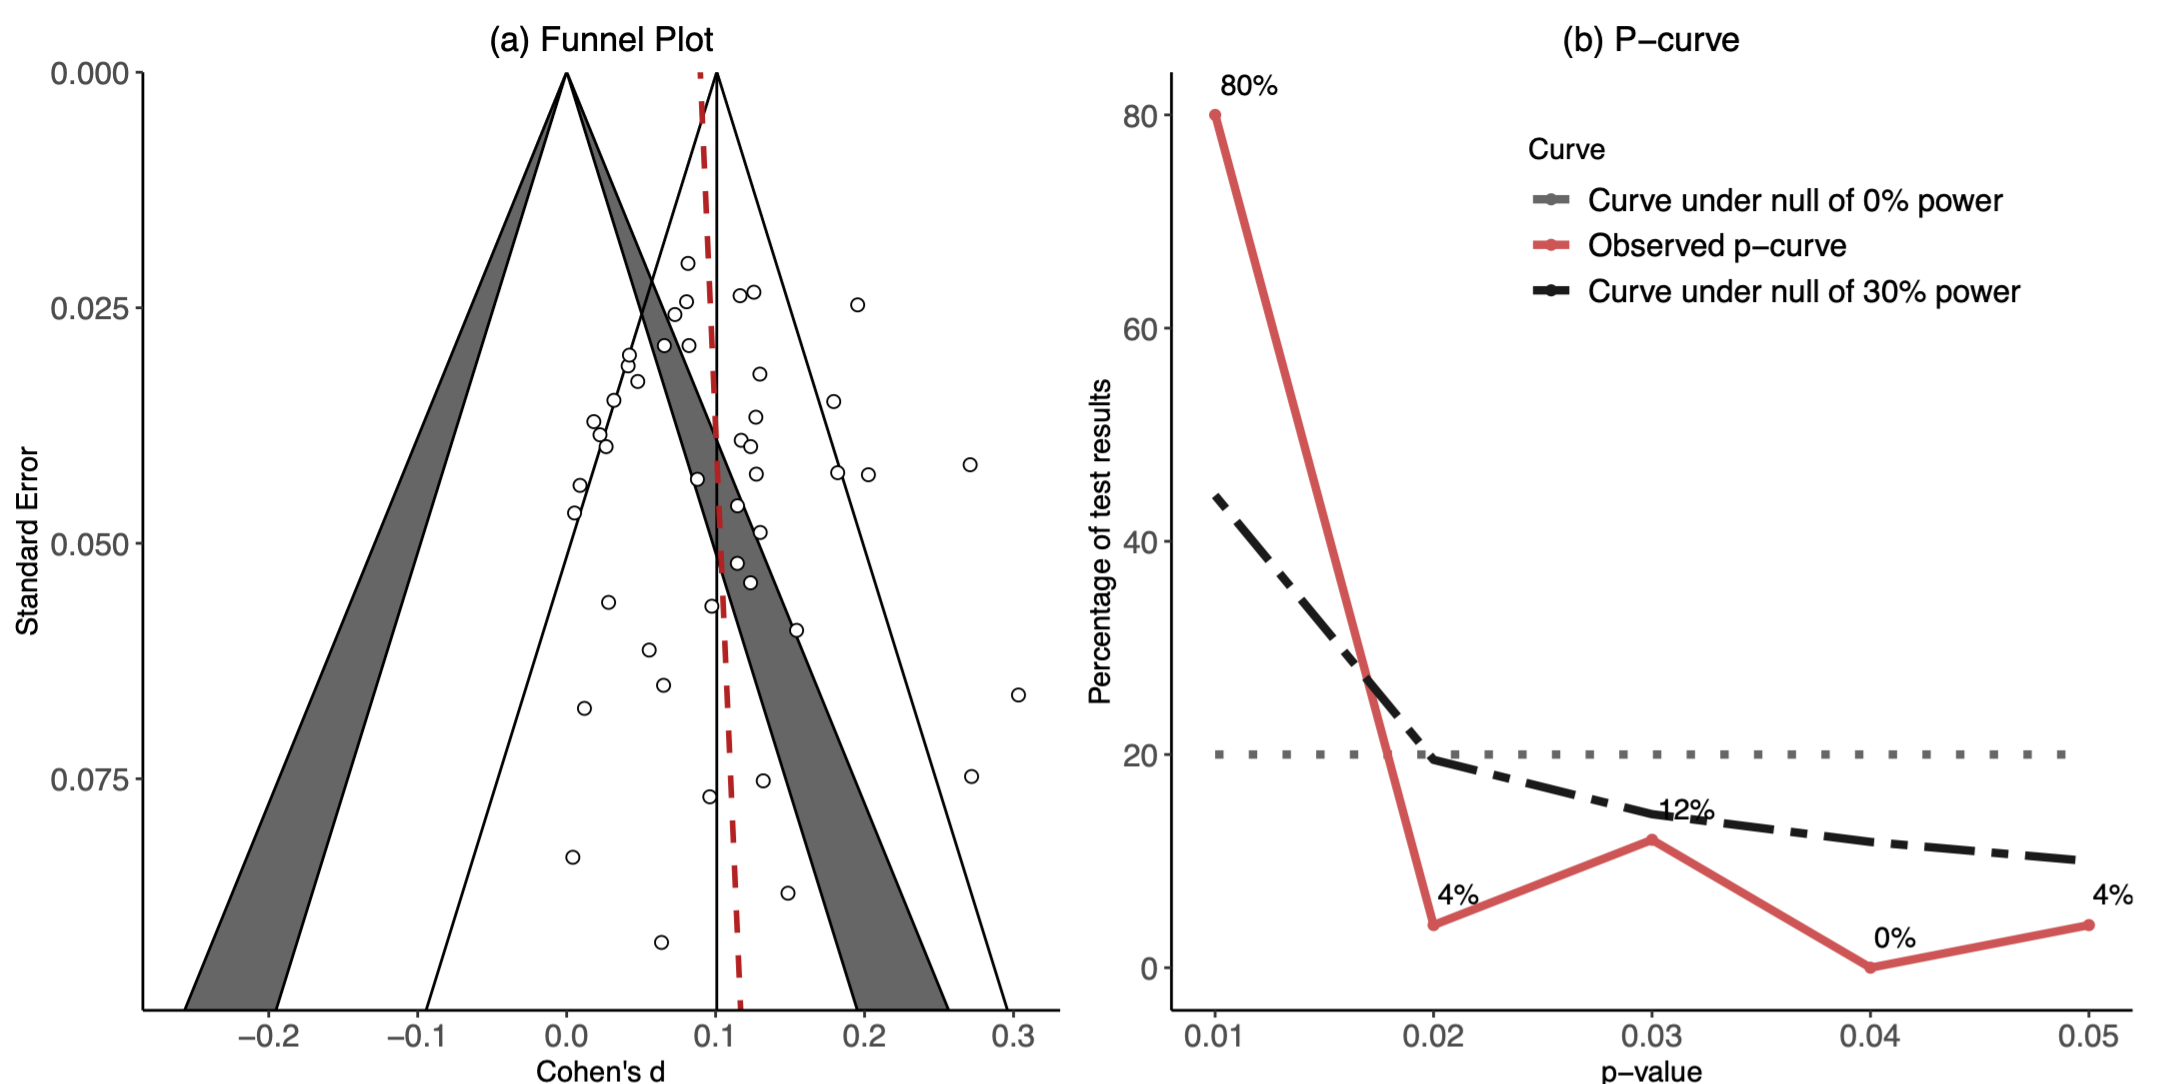 Funnel plot and P-curve for evidence of potential bias